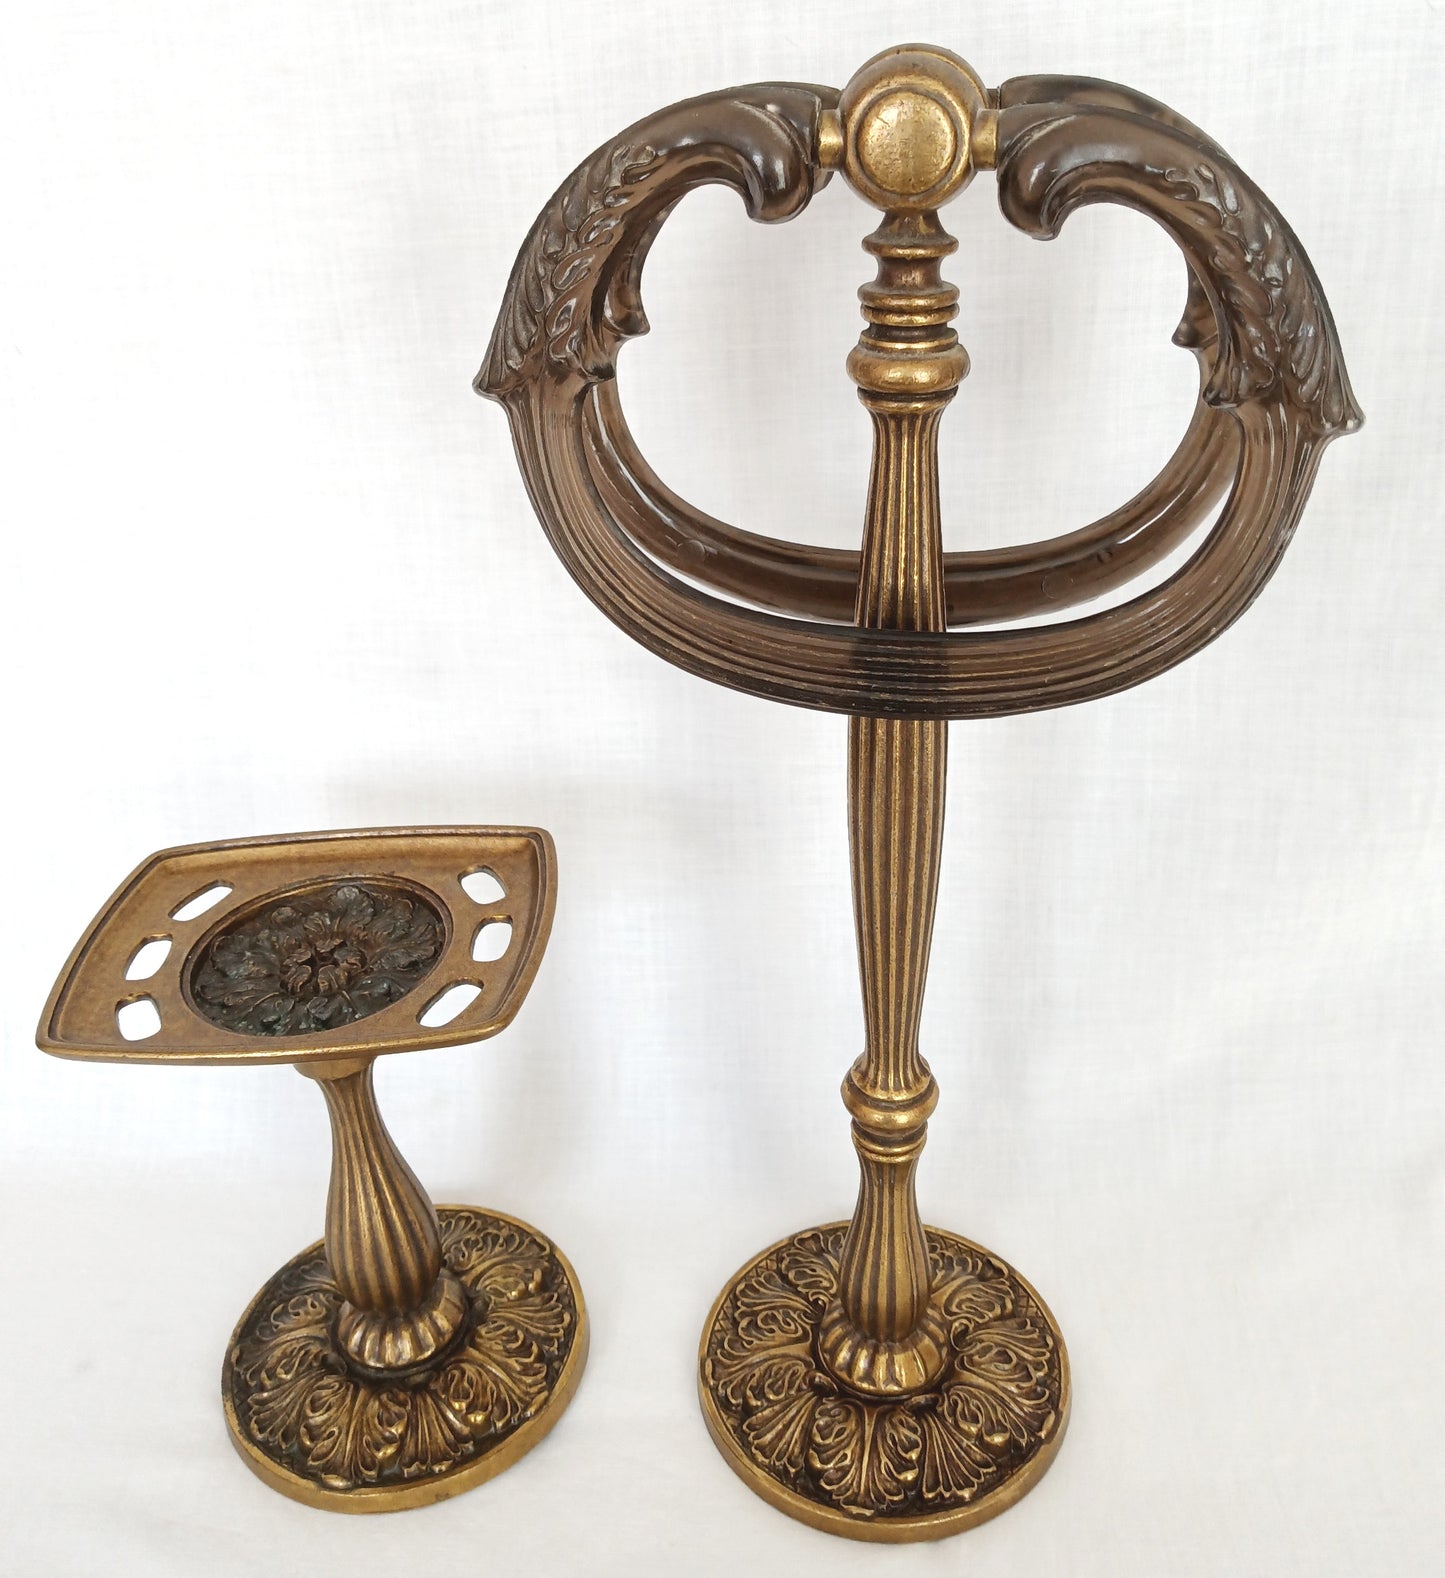 Set of 2 Bathroom Accessories Brass Resin Double Rings Towel Stand Tumbler &Toothbrush Holder Neo Classical Ornate Pedestal Style BF 118